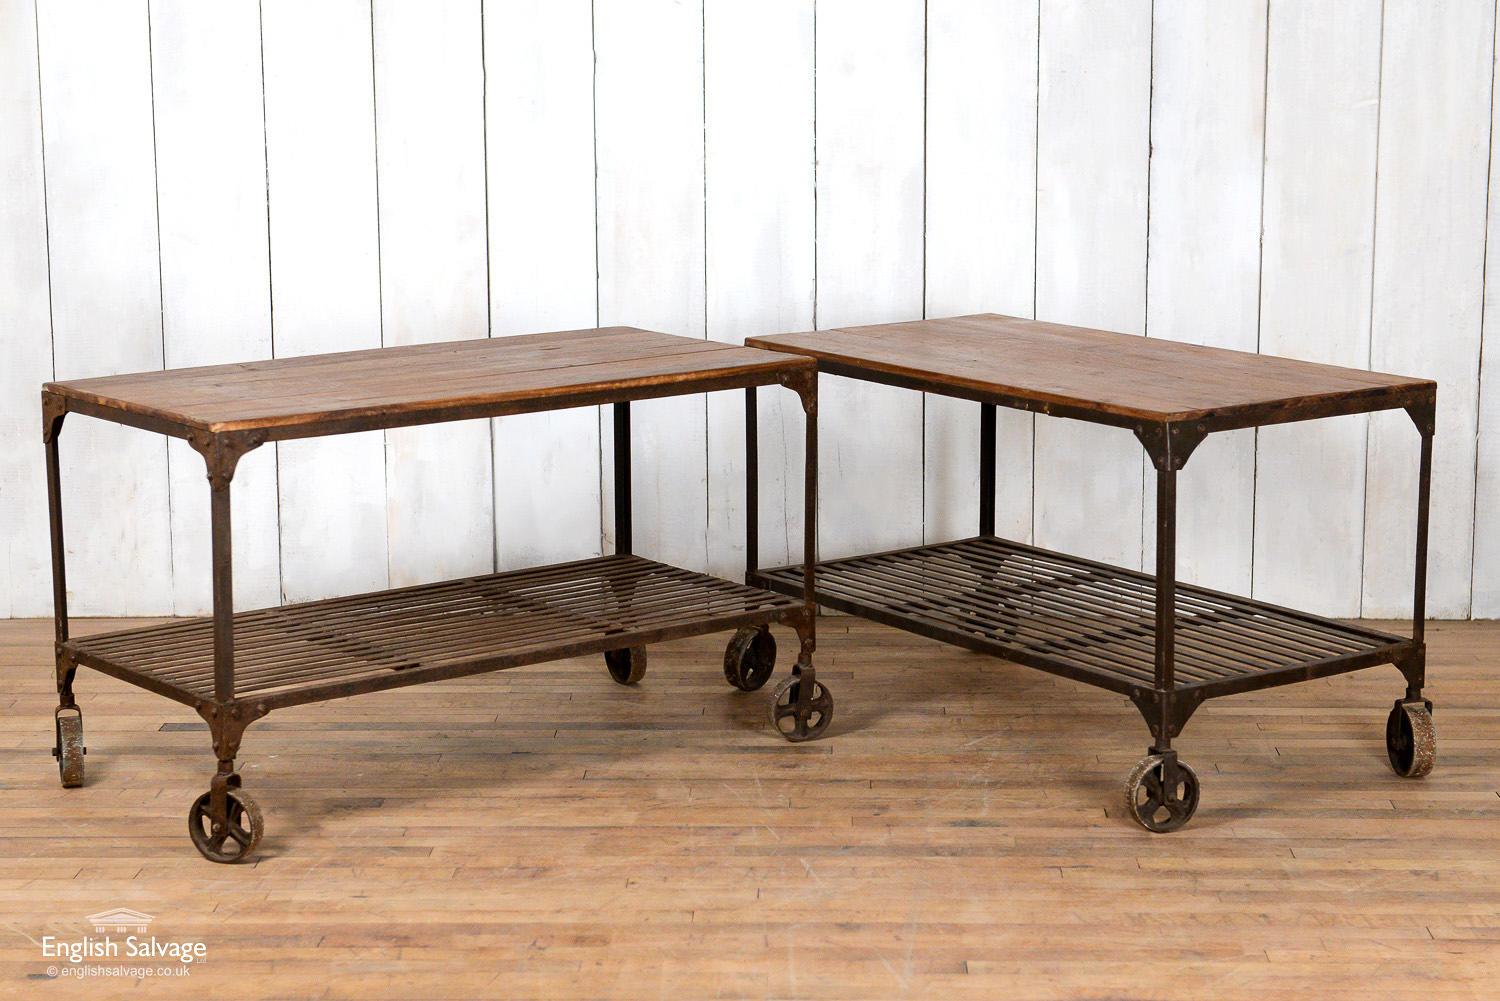 These multifunctional table trolleys with an industrial feel are made from reclaimed hardwood coupled with iron frames and wheels. They have a weathered appearance with some marks and surface rust to the frame and an appealing patina to the wood.